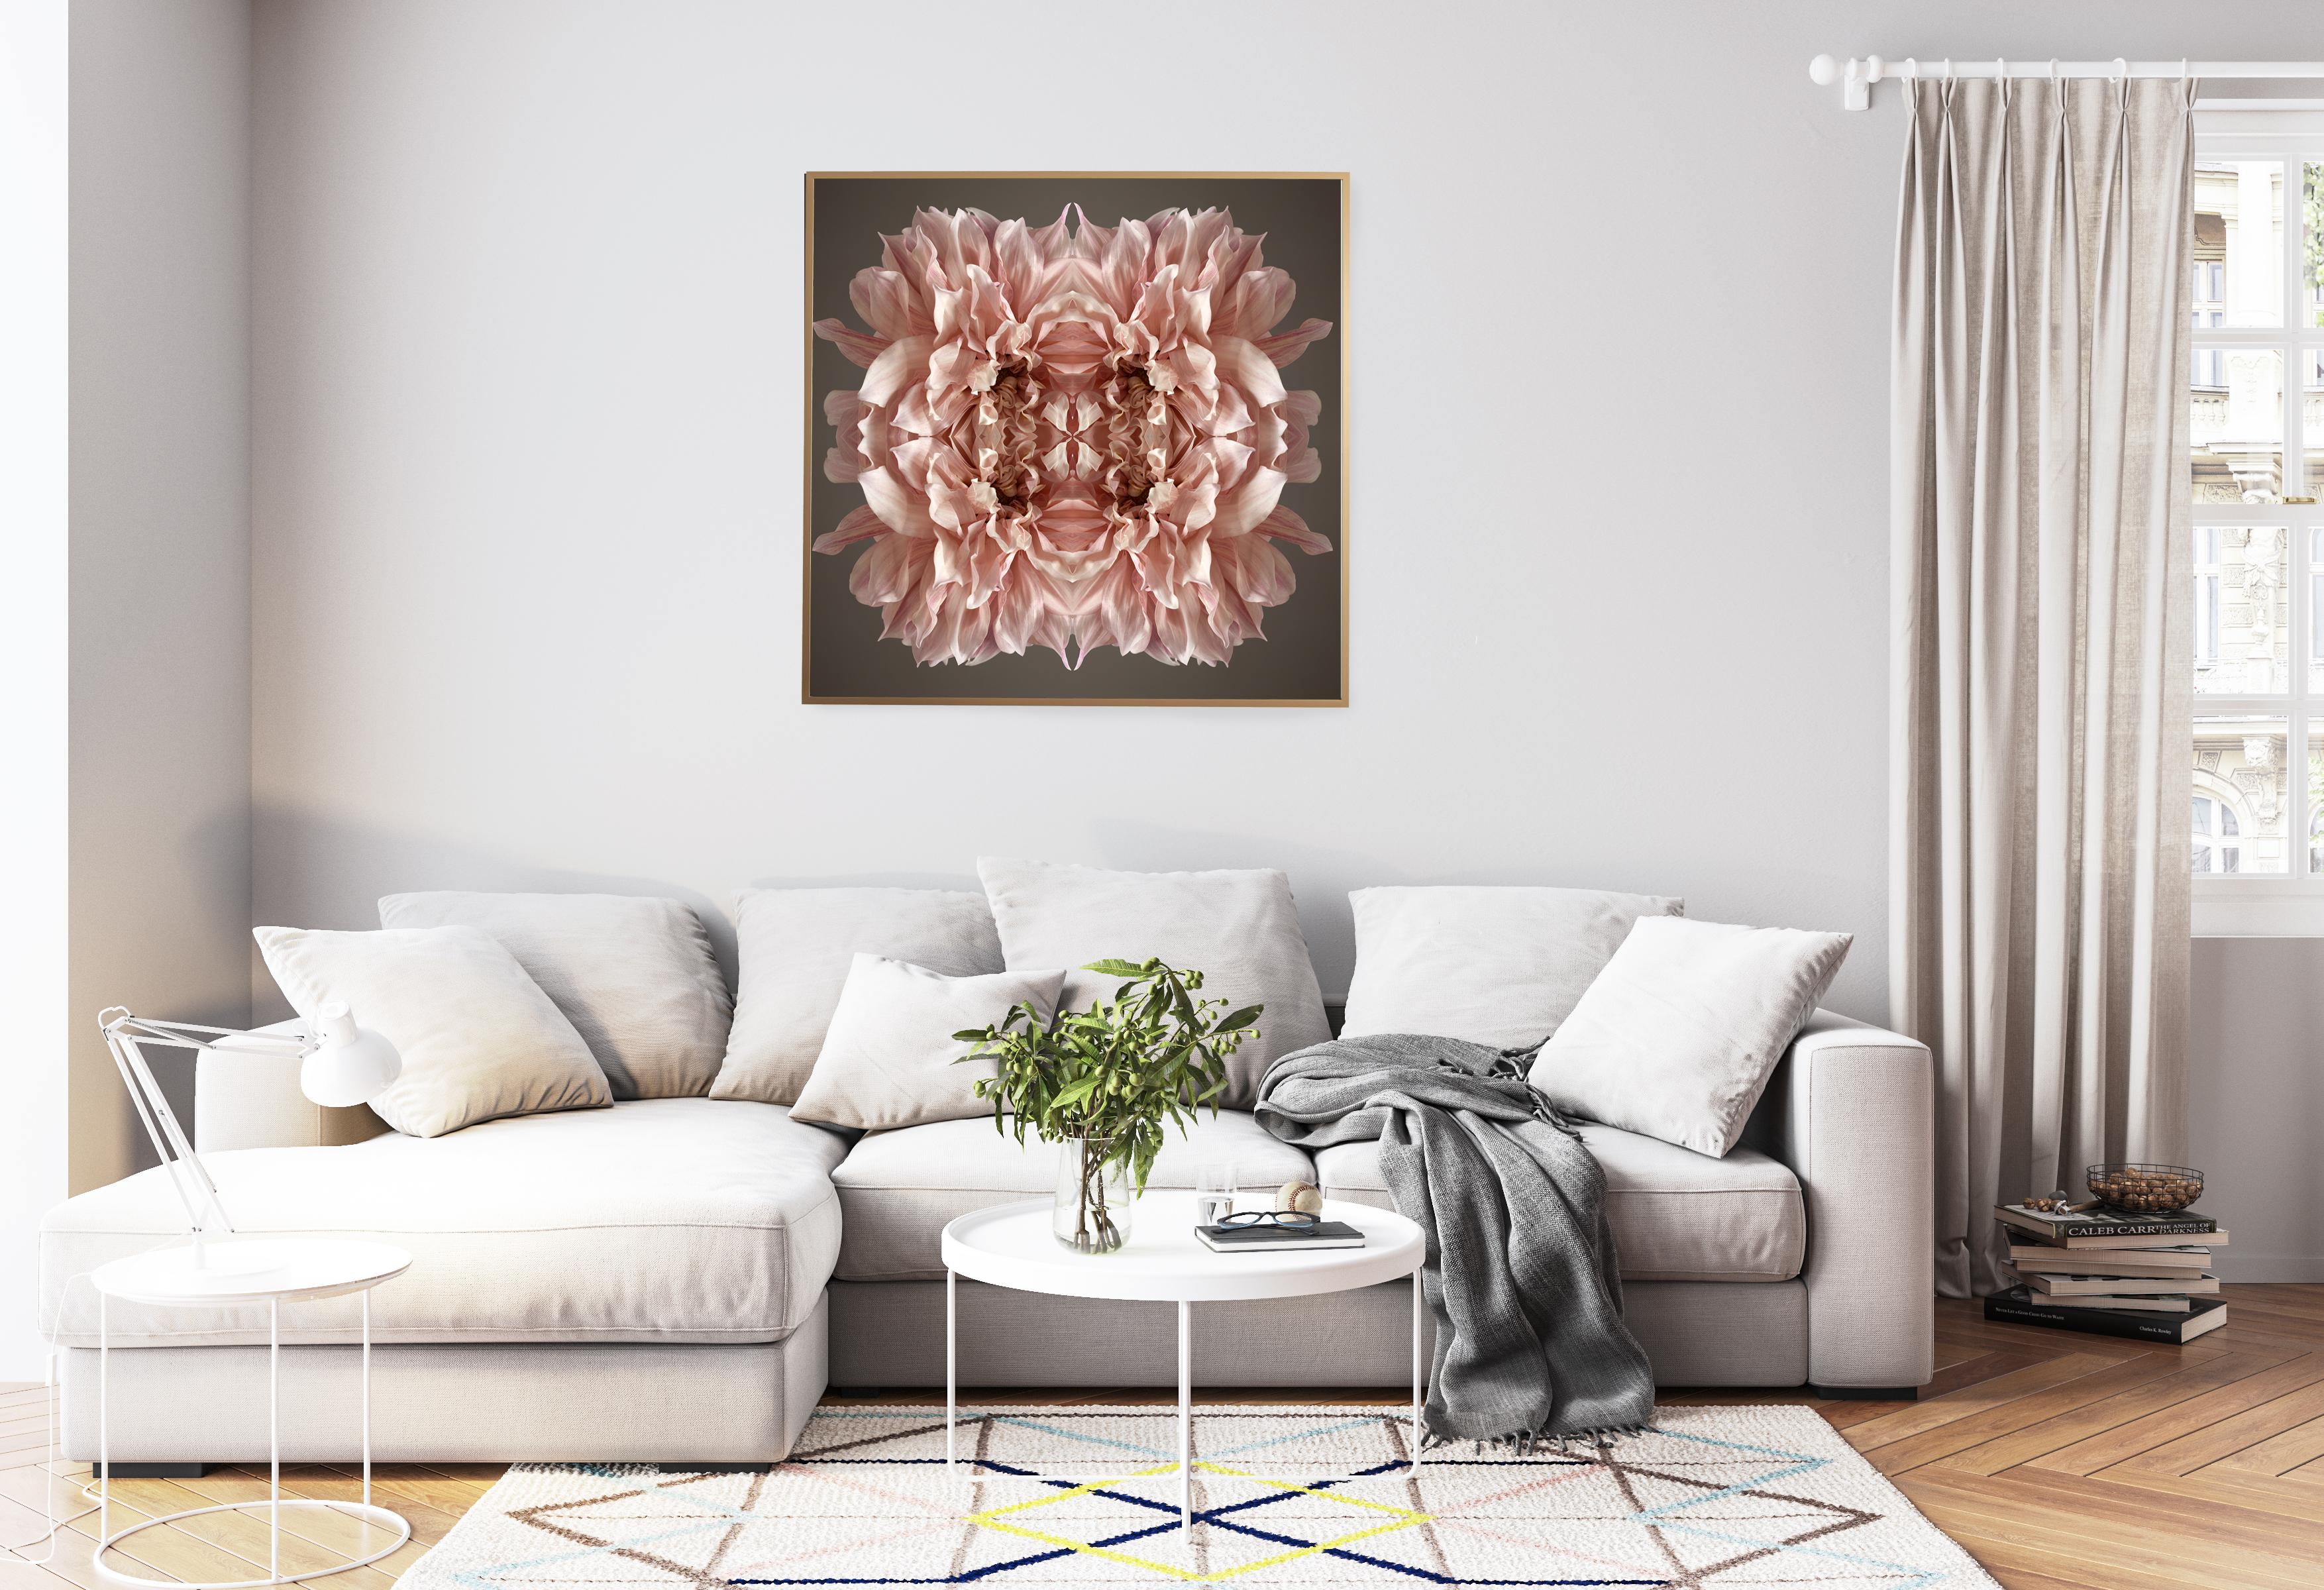 This print features the playful relationship between natural forms and botanicals. In this image Erin uses the natural composition of the pink and blush of the Peony, and her own collage work, to create a hypnotic mandala with the botanicals. Some